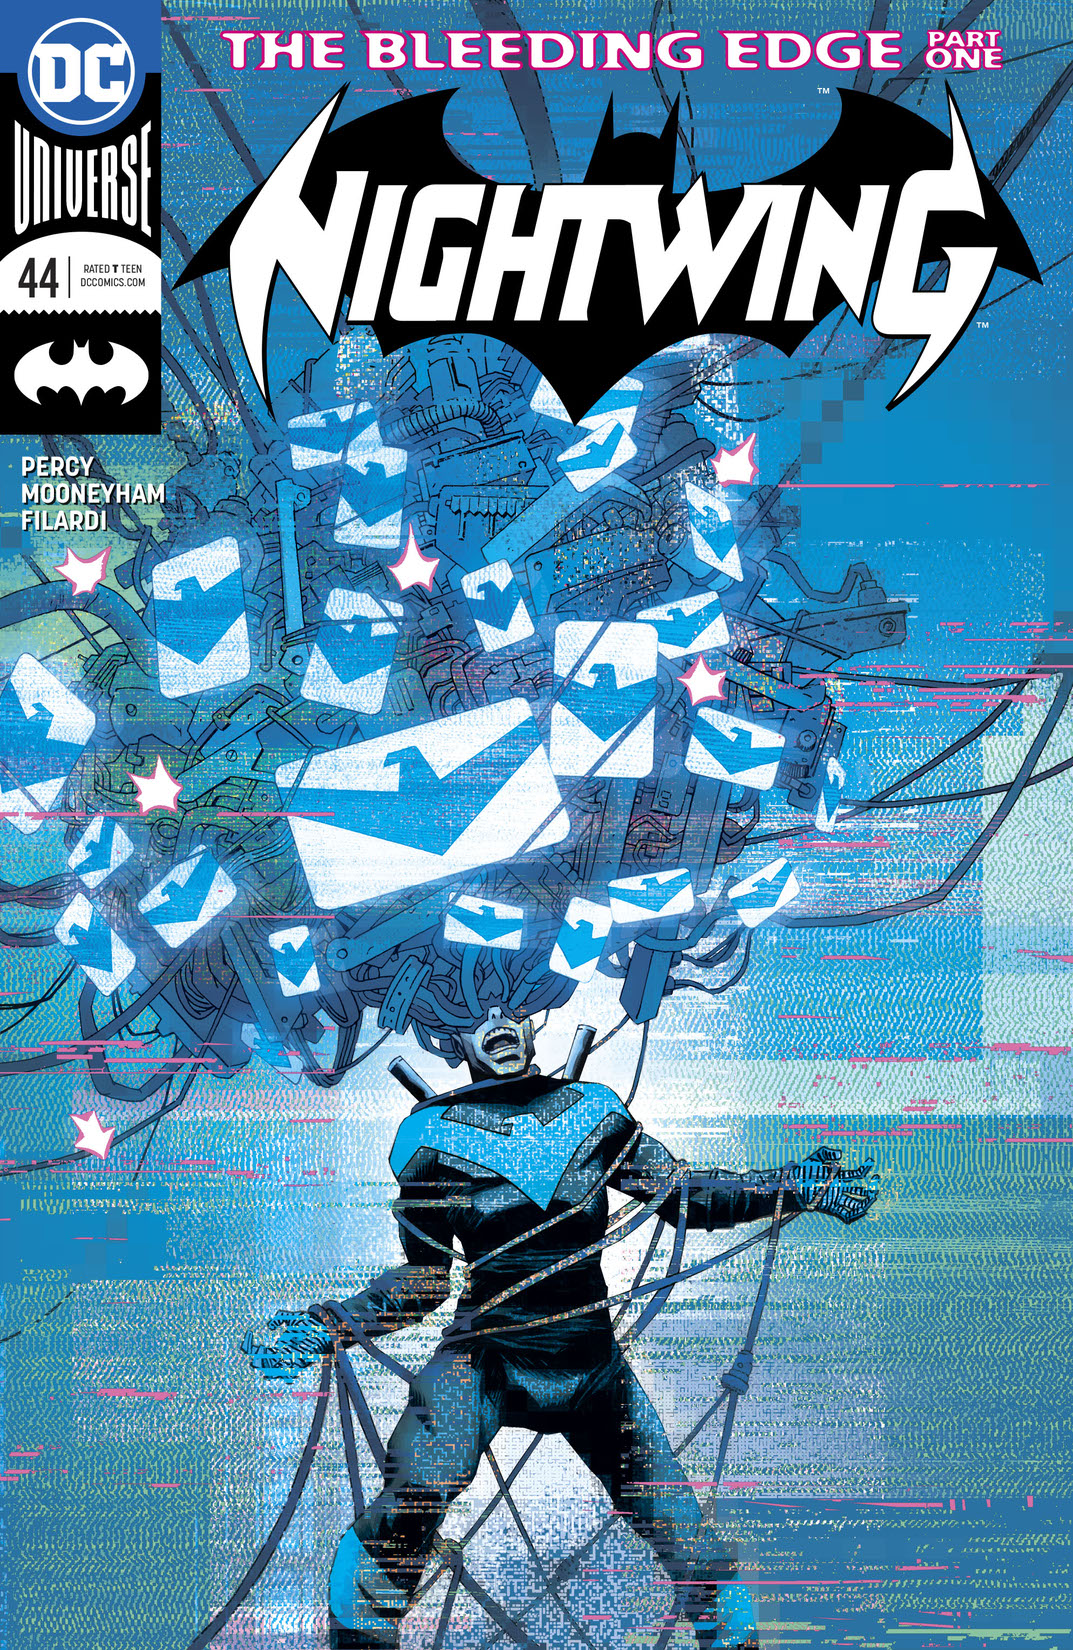 Nightwing (2016-) #44 preview images